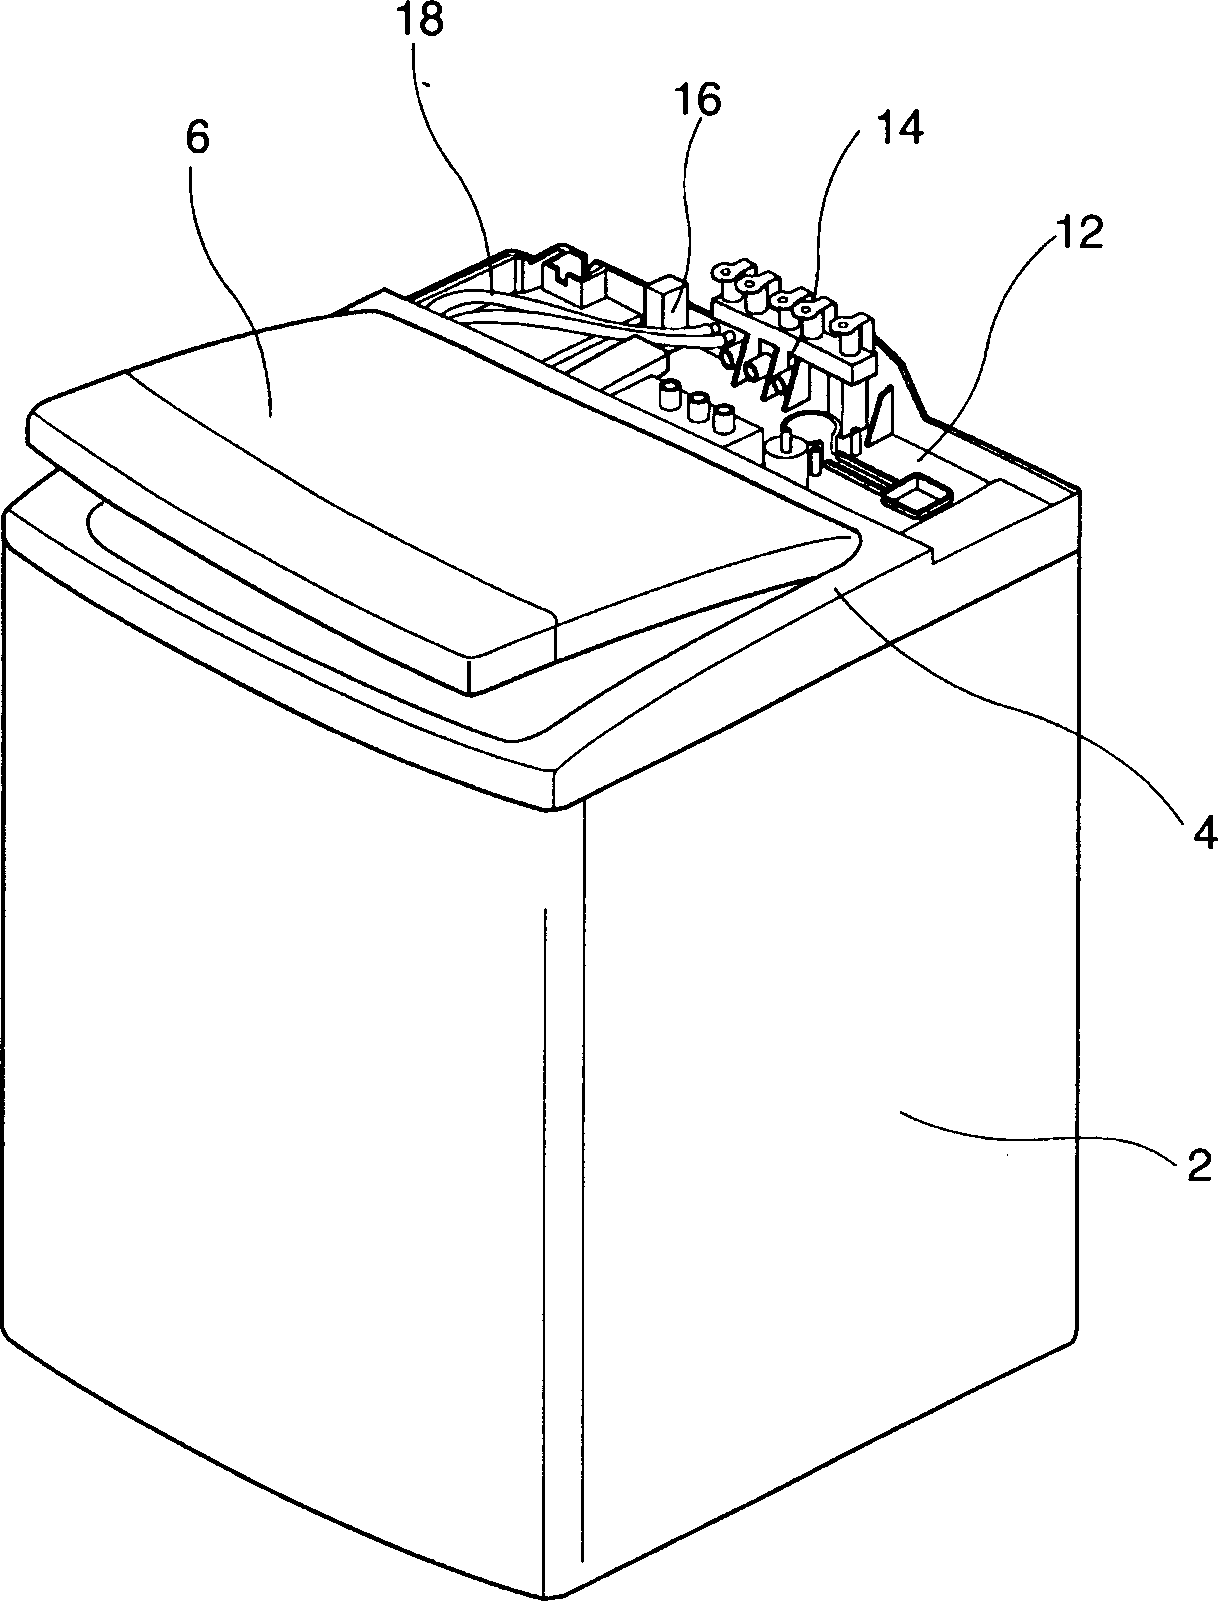 Connecting hose support device for washing machine